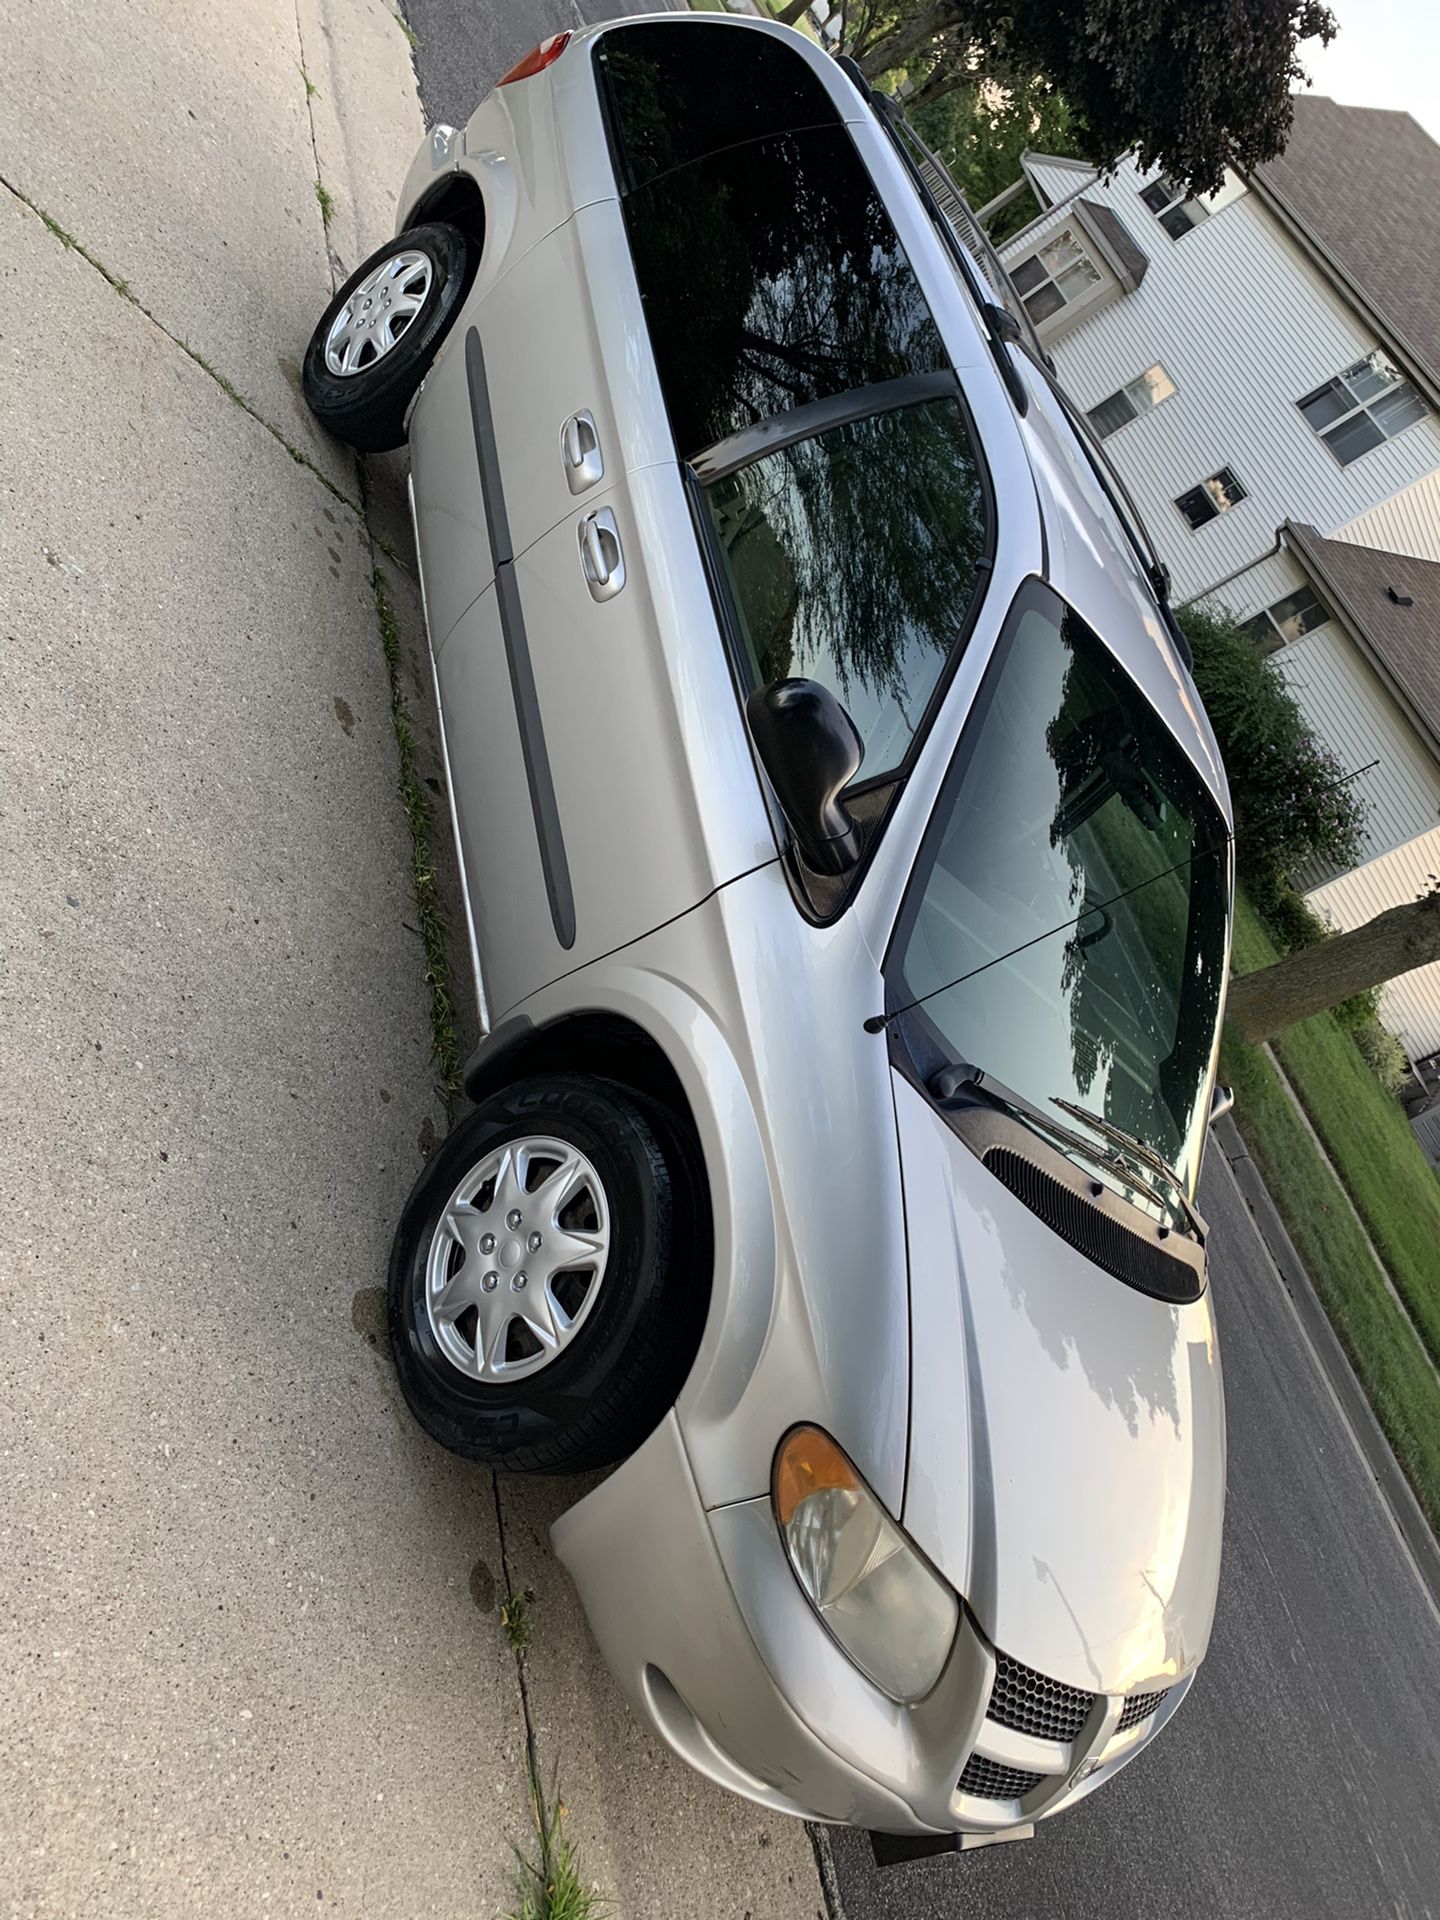 2002 dodge caravan (Great condition) Runs great Clean in and out Cloth seats Nice CD player Great sound system Cold 🥶 air Hot 🥵 heat N